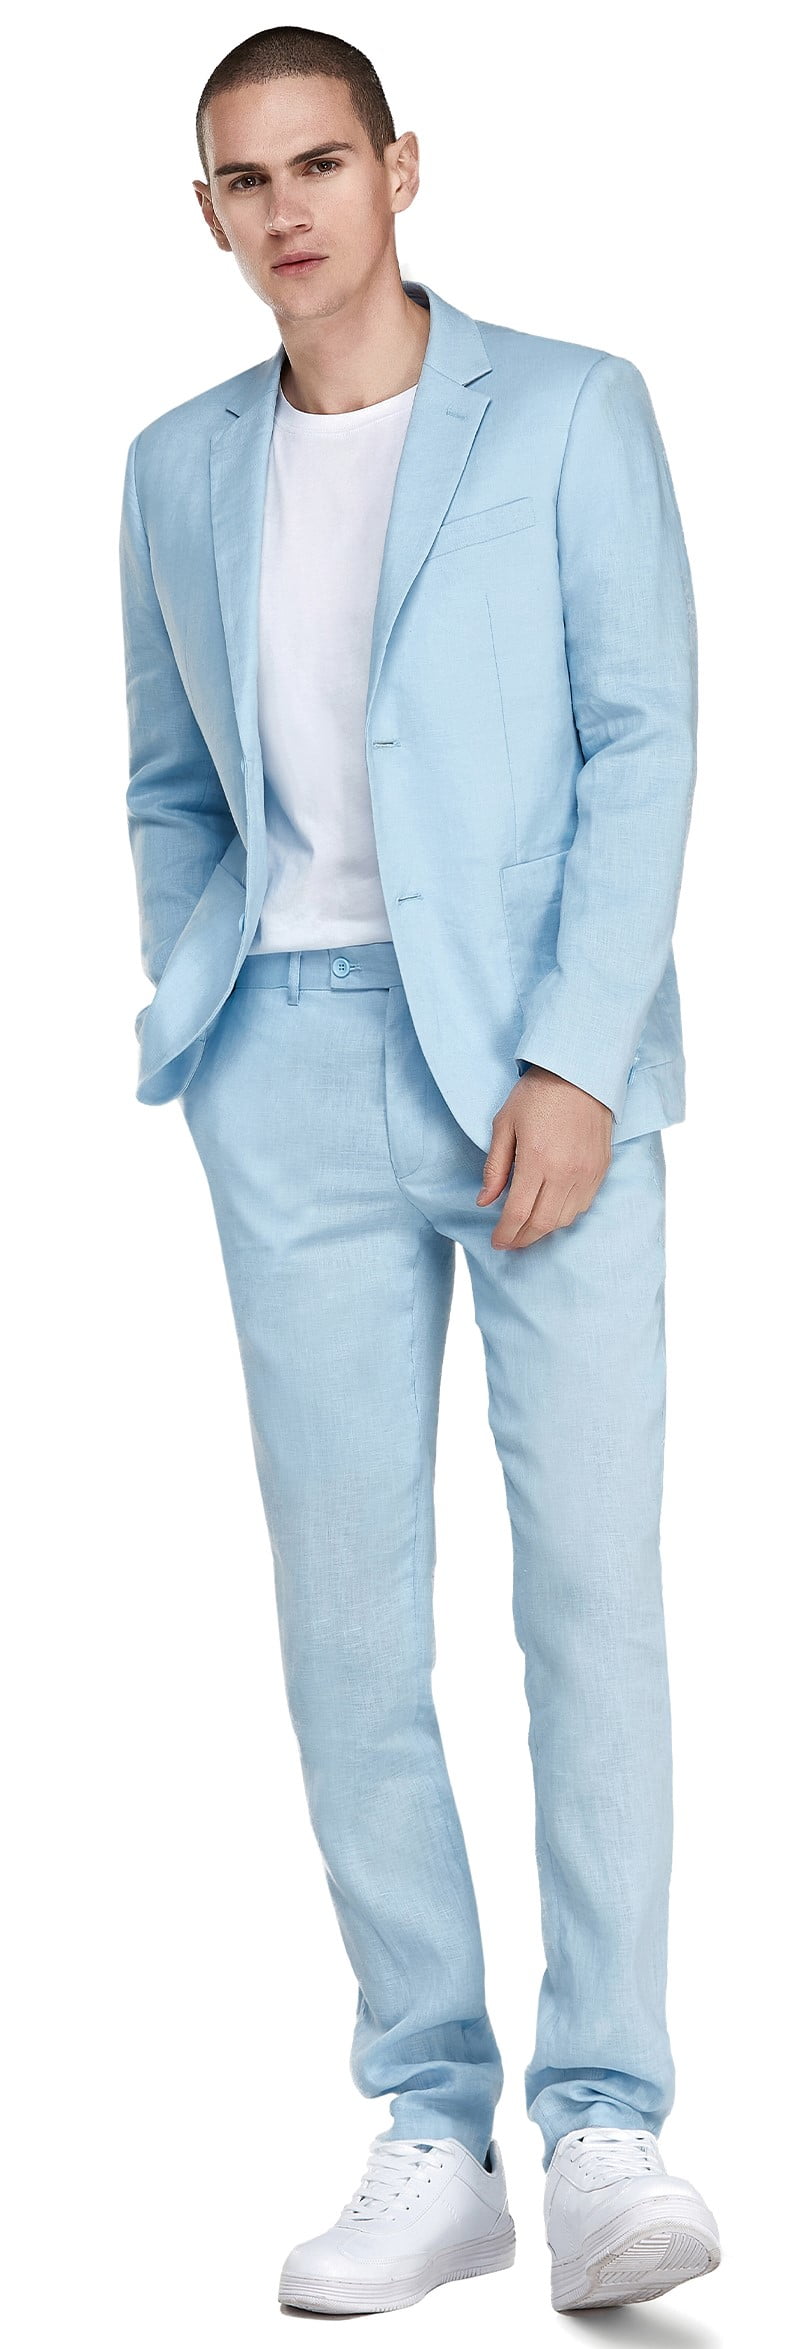 MR11-BEIGE-BLUELT Baby Blue Formal Men Suit - Formal Men Suits Malaysia -  Ready Made for Rental and Purchase